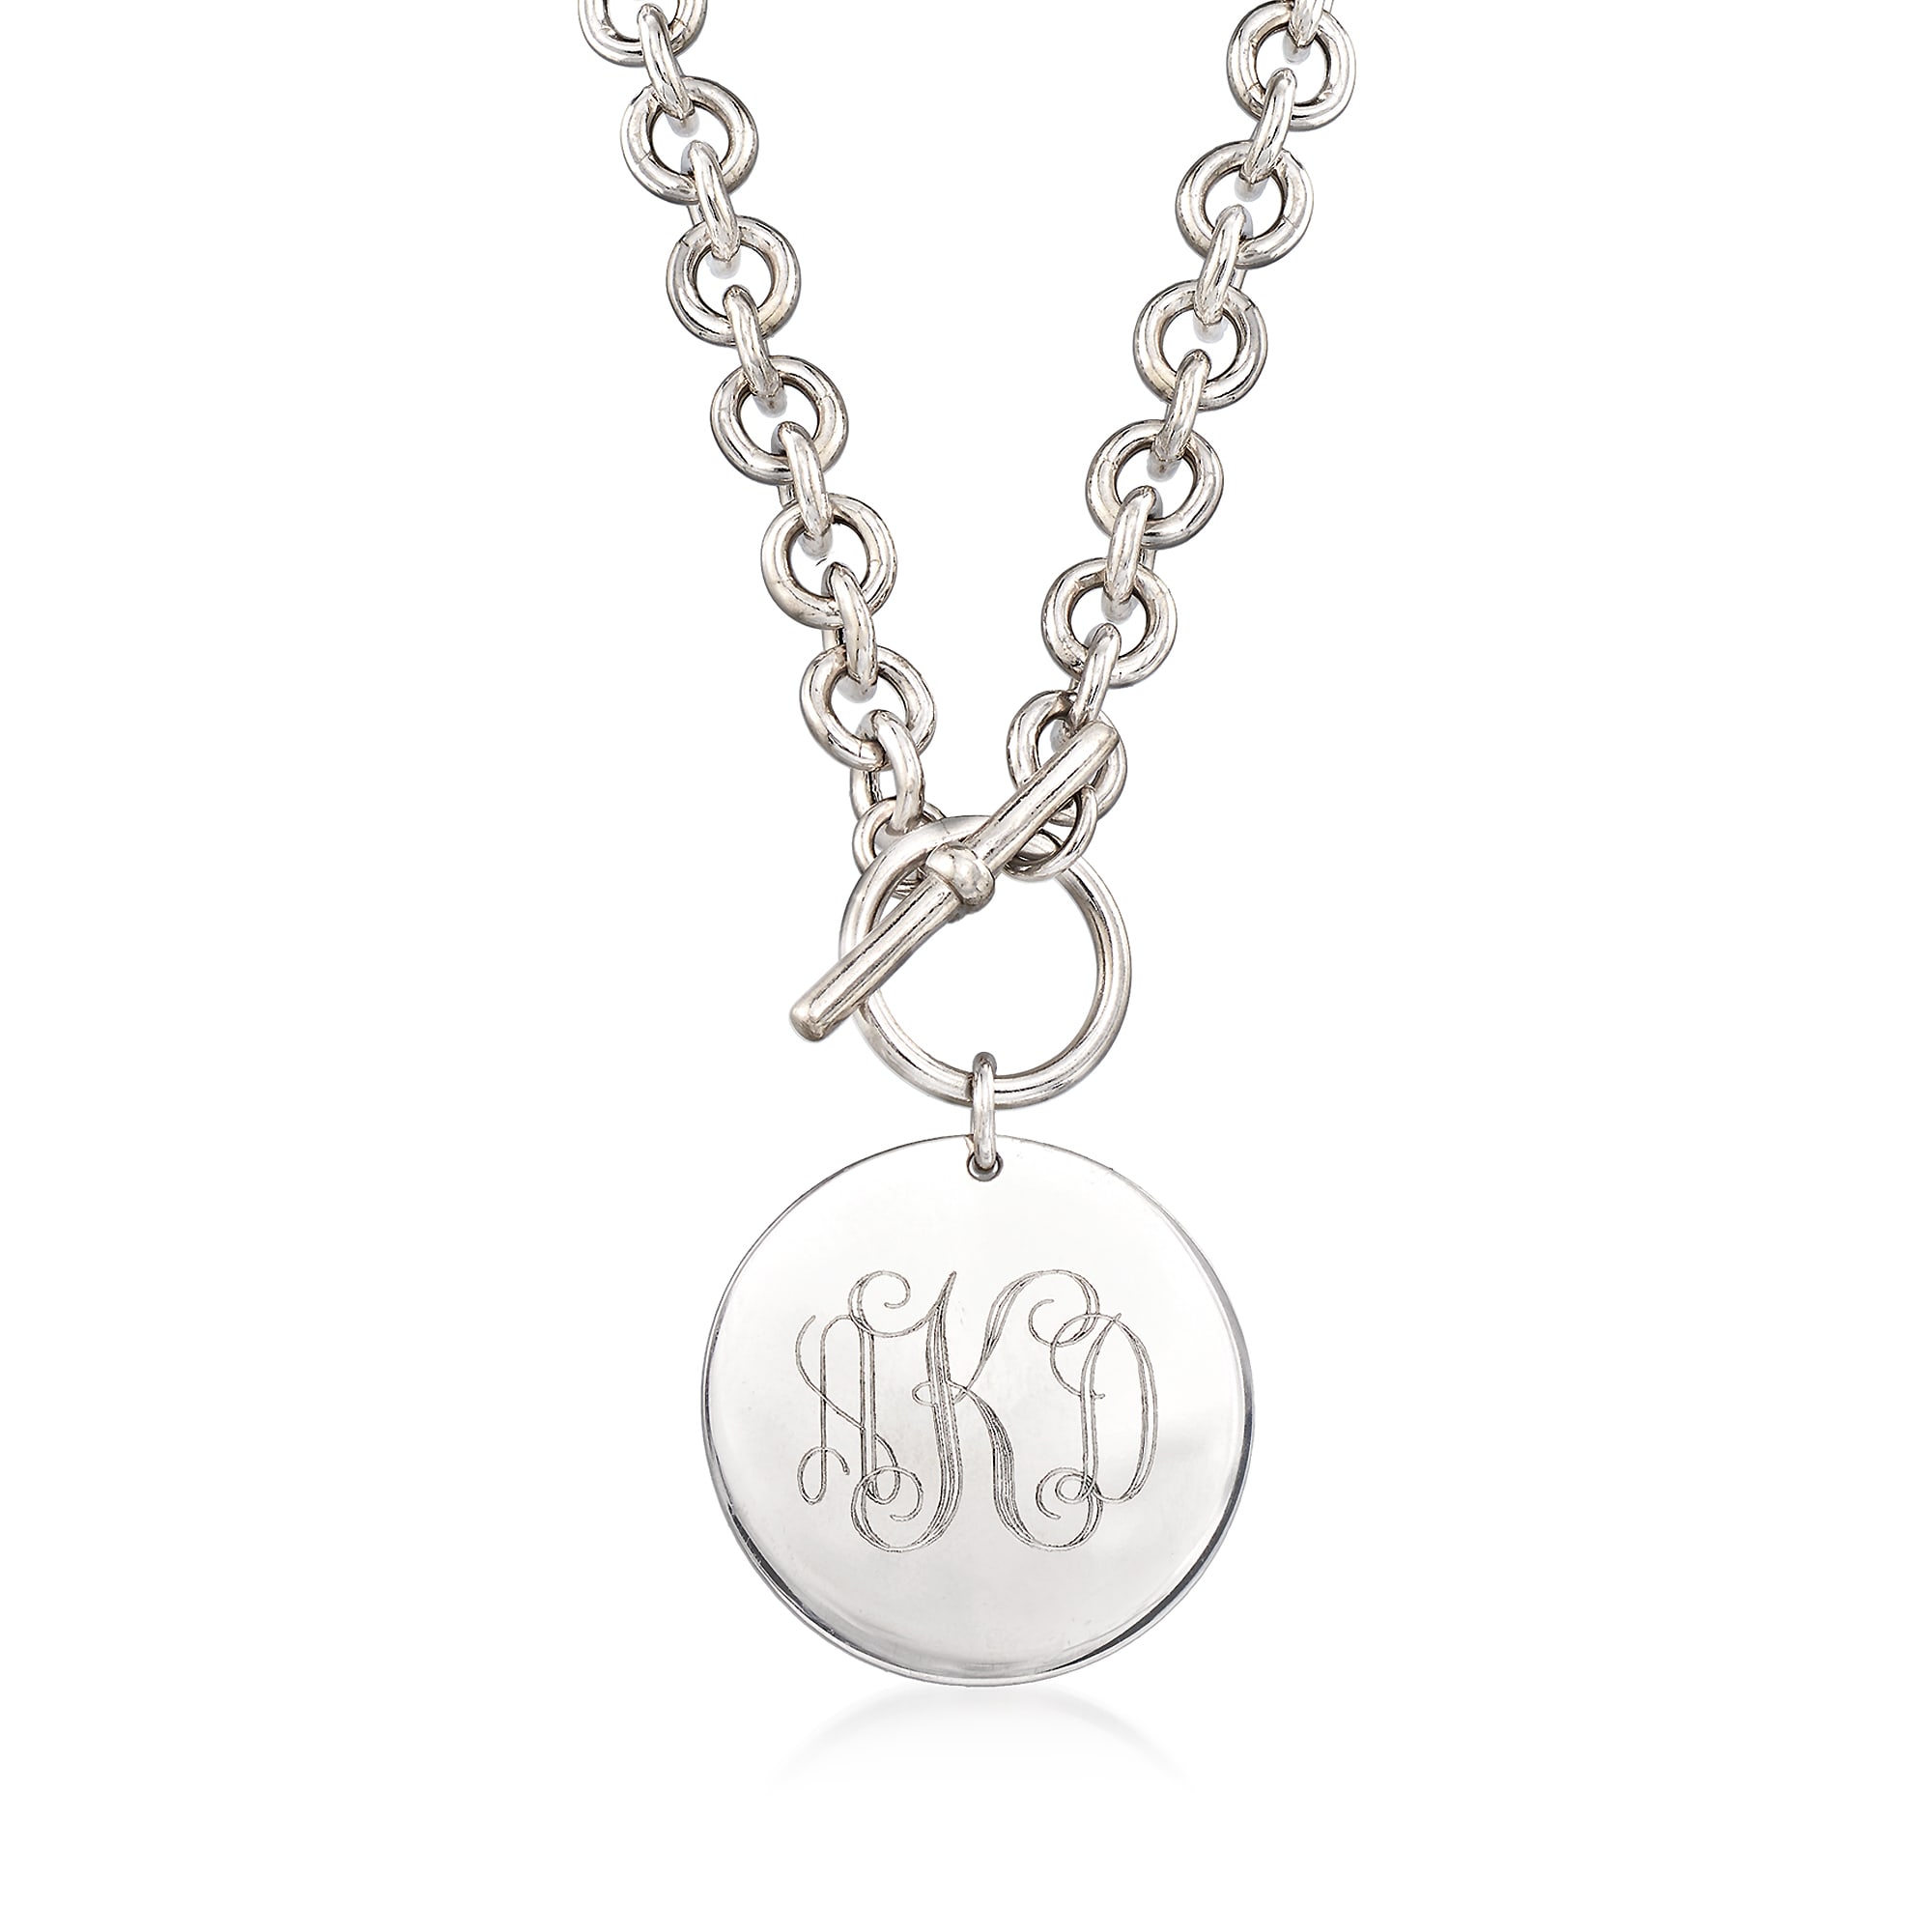 Hand engraved monogram disc charm necklace with Toggle clasp and large link  chain.